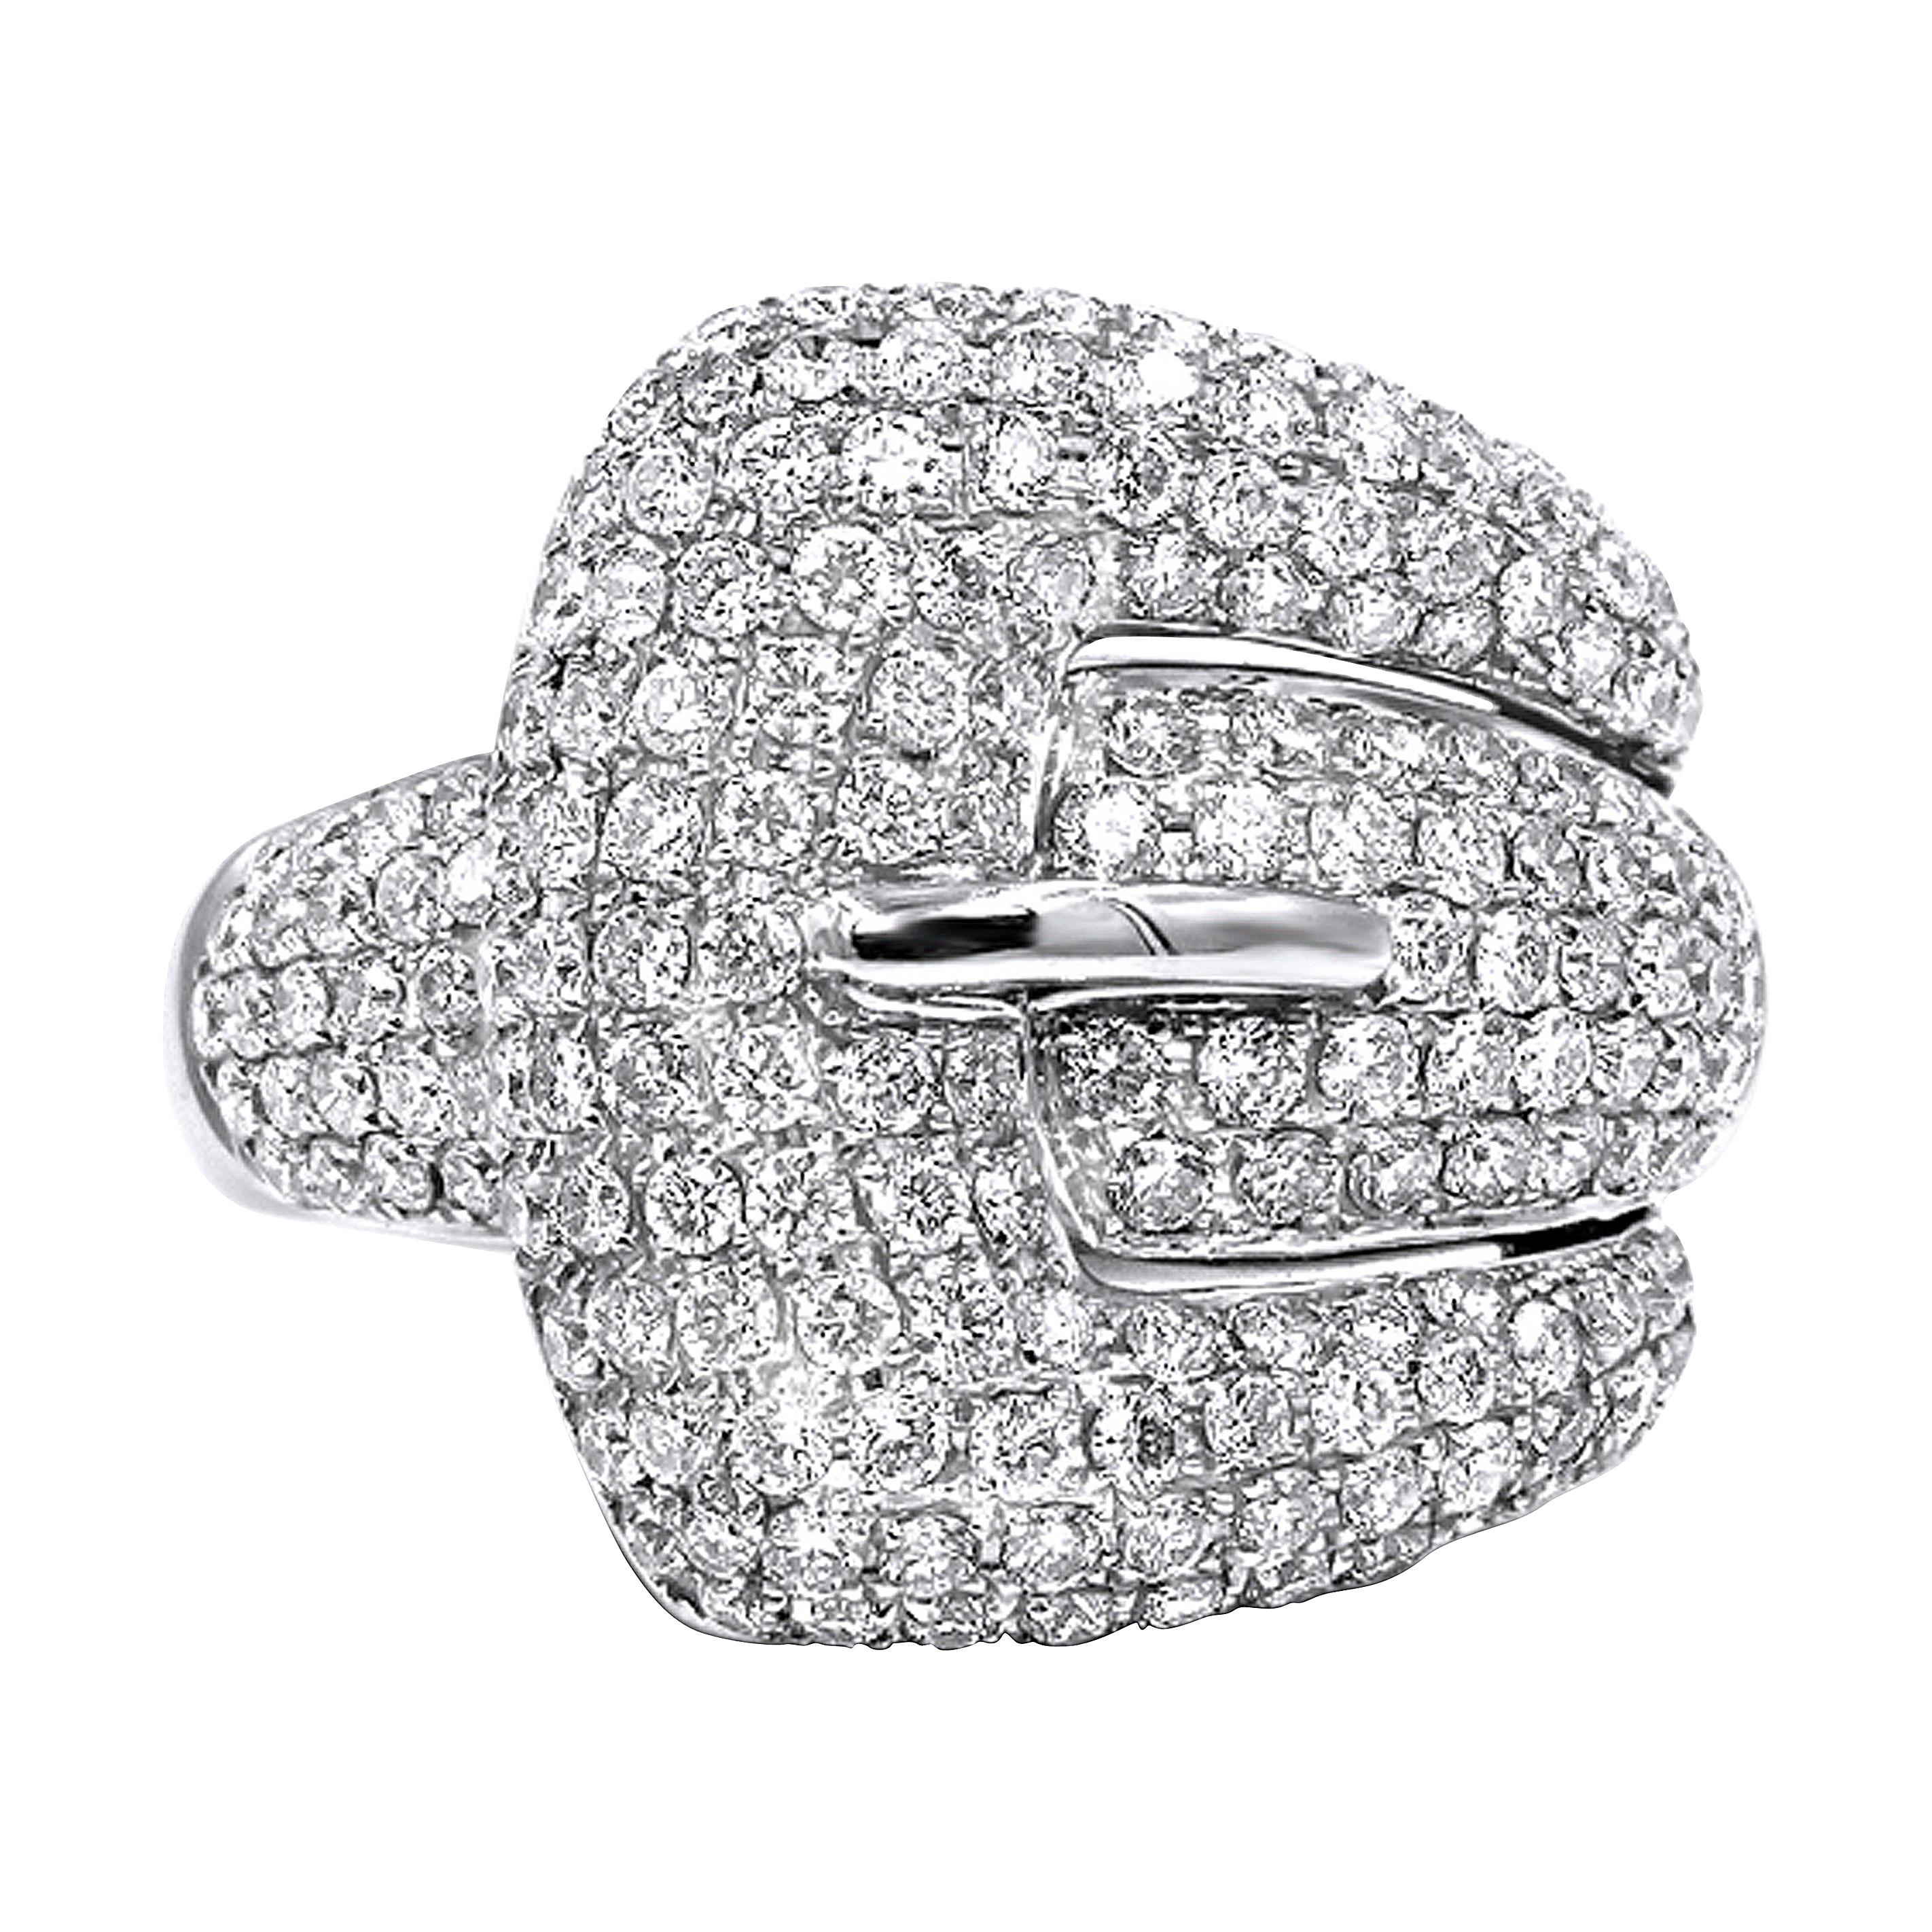 1.78 Carat Pave Diamond Buckle Cocktail Ring set in 18kt white gold For Sale